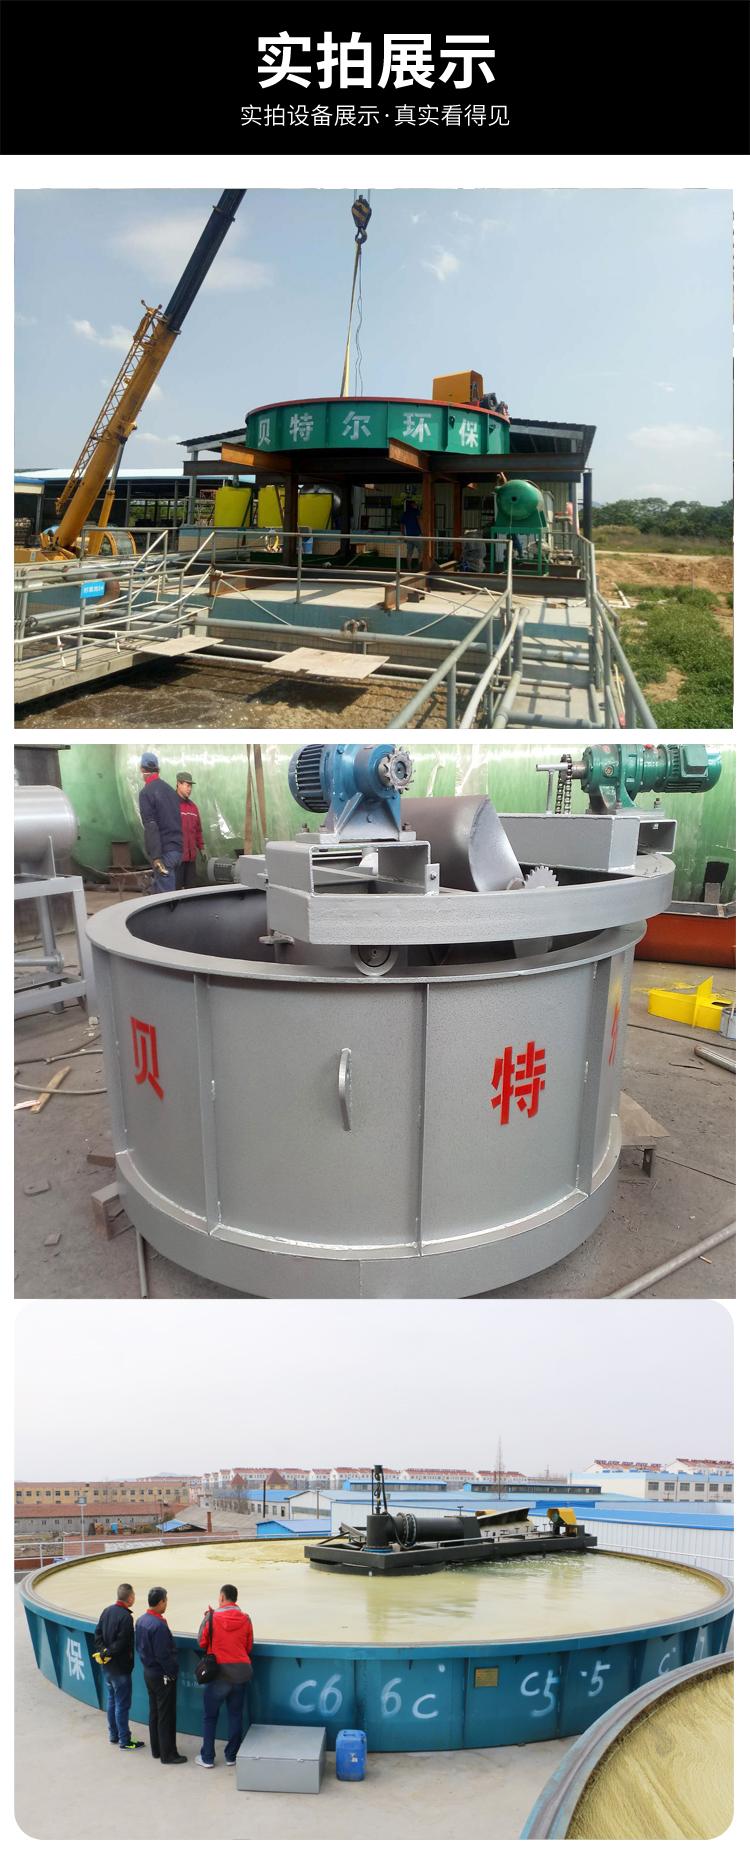 Efficient Shallow Air Floatation Machine for Large Food Factory Sewage Treatment Equipment Printing, Dyeing, Paper Making, and Slaughtering Wastewater Treatment